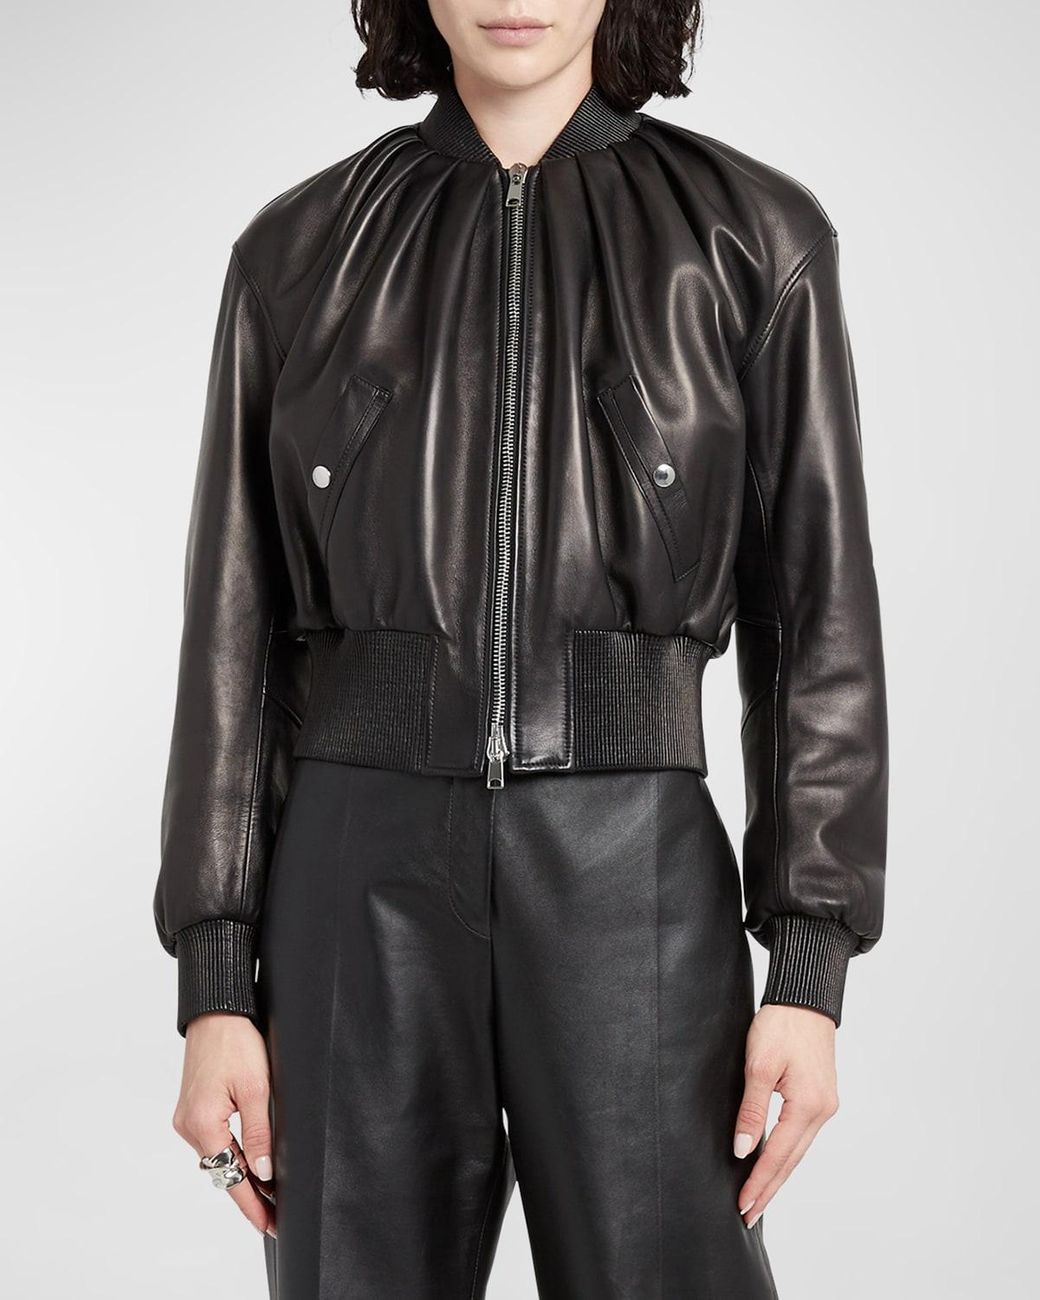 Alexander McQueen Ruched Leather Crop Bomber Jacket in Black | Lyst